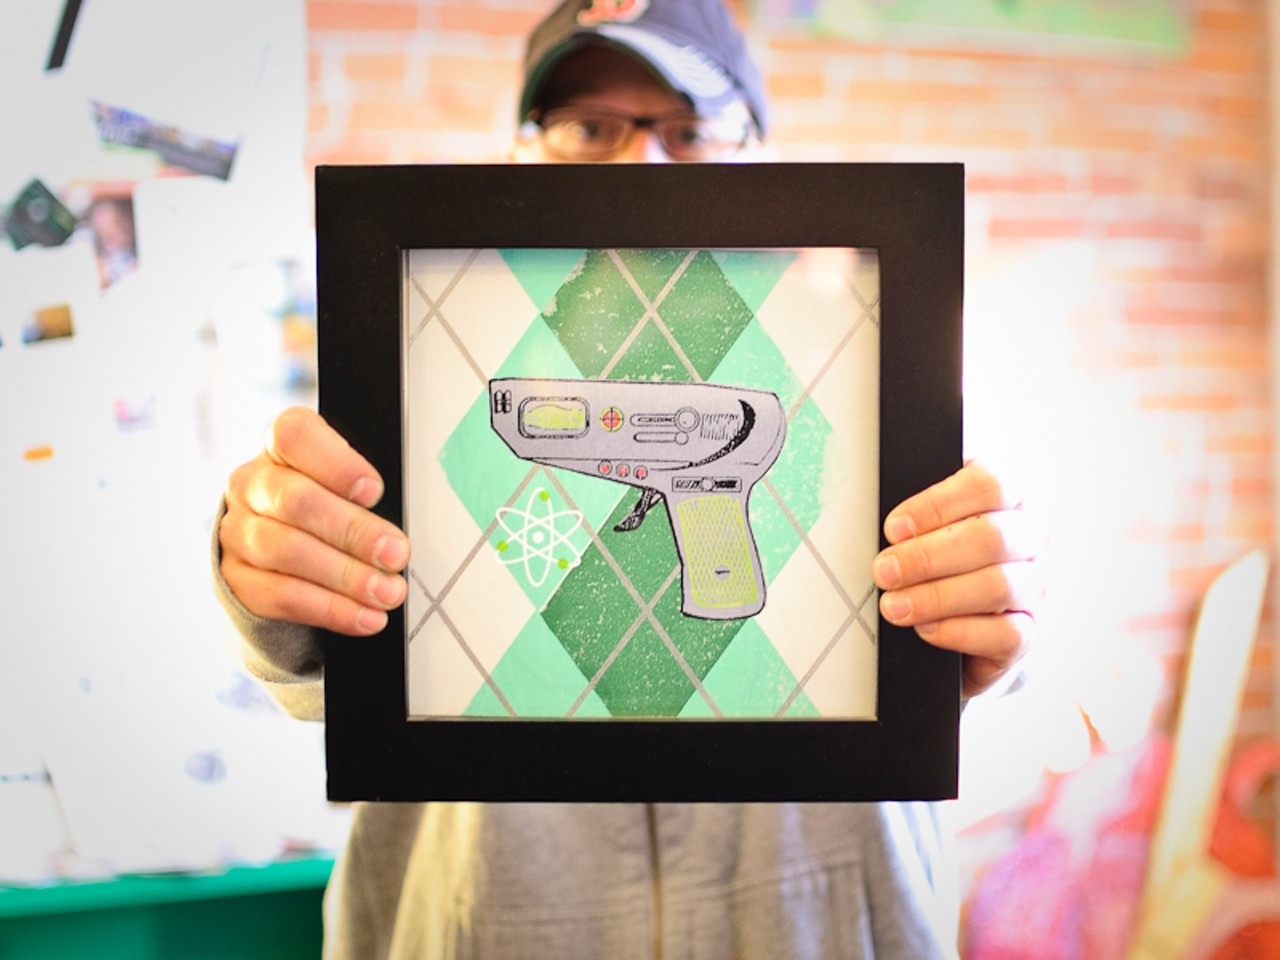 Josh Reingold was exhibiting primarily to represent the St. Louis art scene -- and his piece &ldquo;Gaygun&rdquo; plays up the retro-hip flavor.